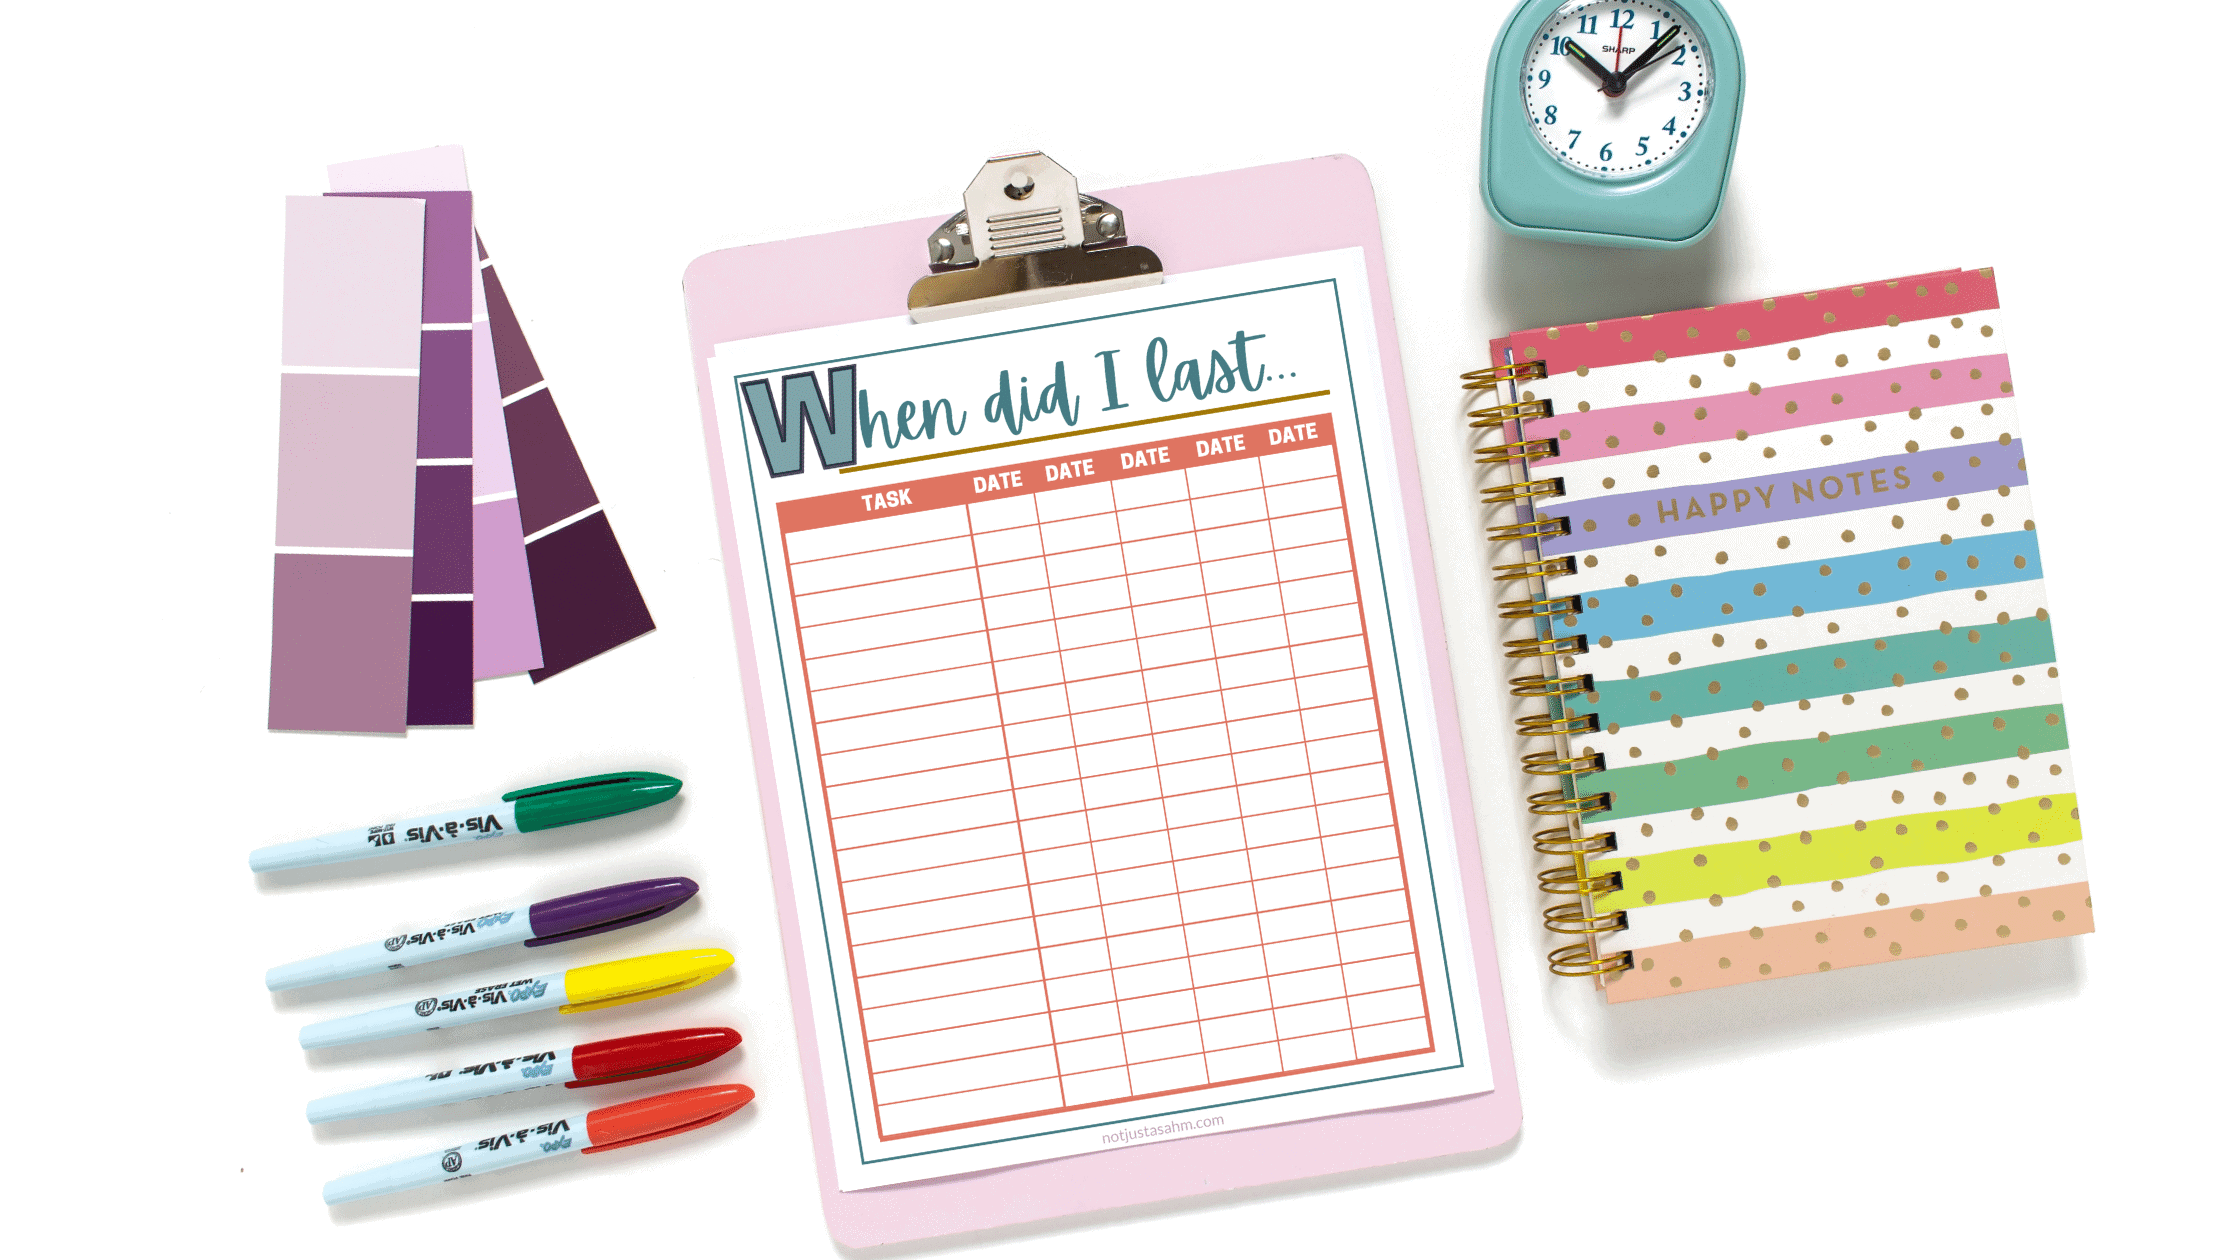 Free Printable: When Did I Last…